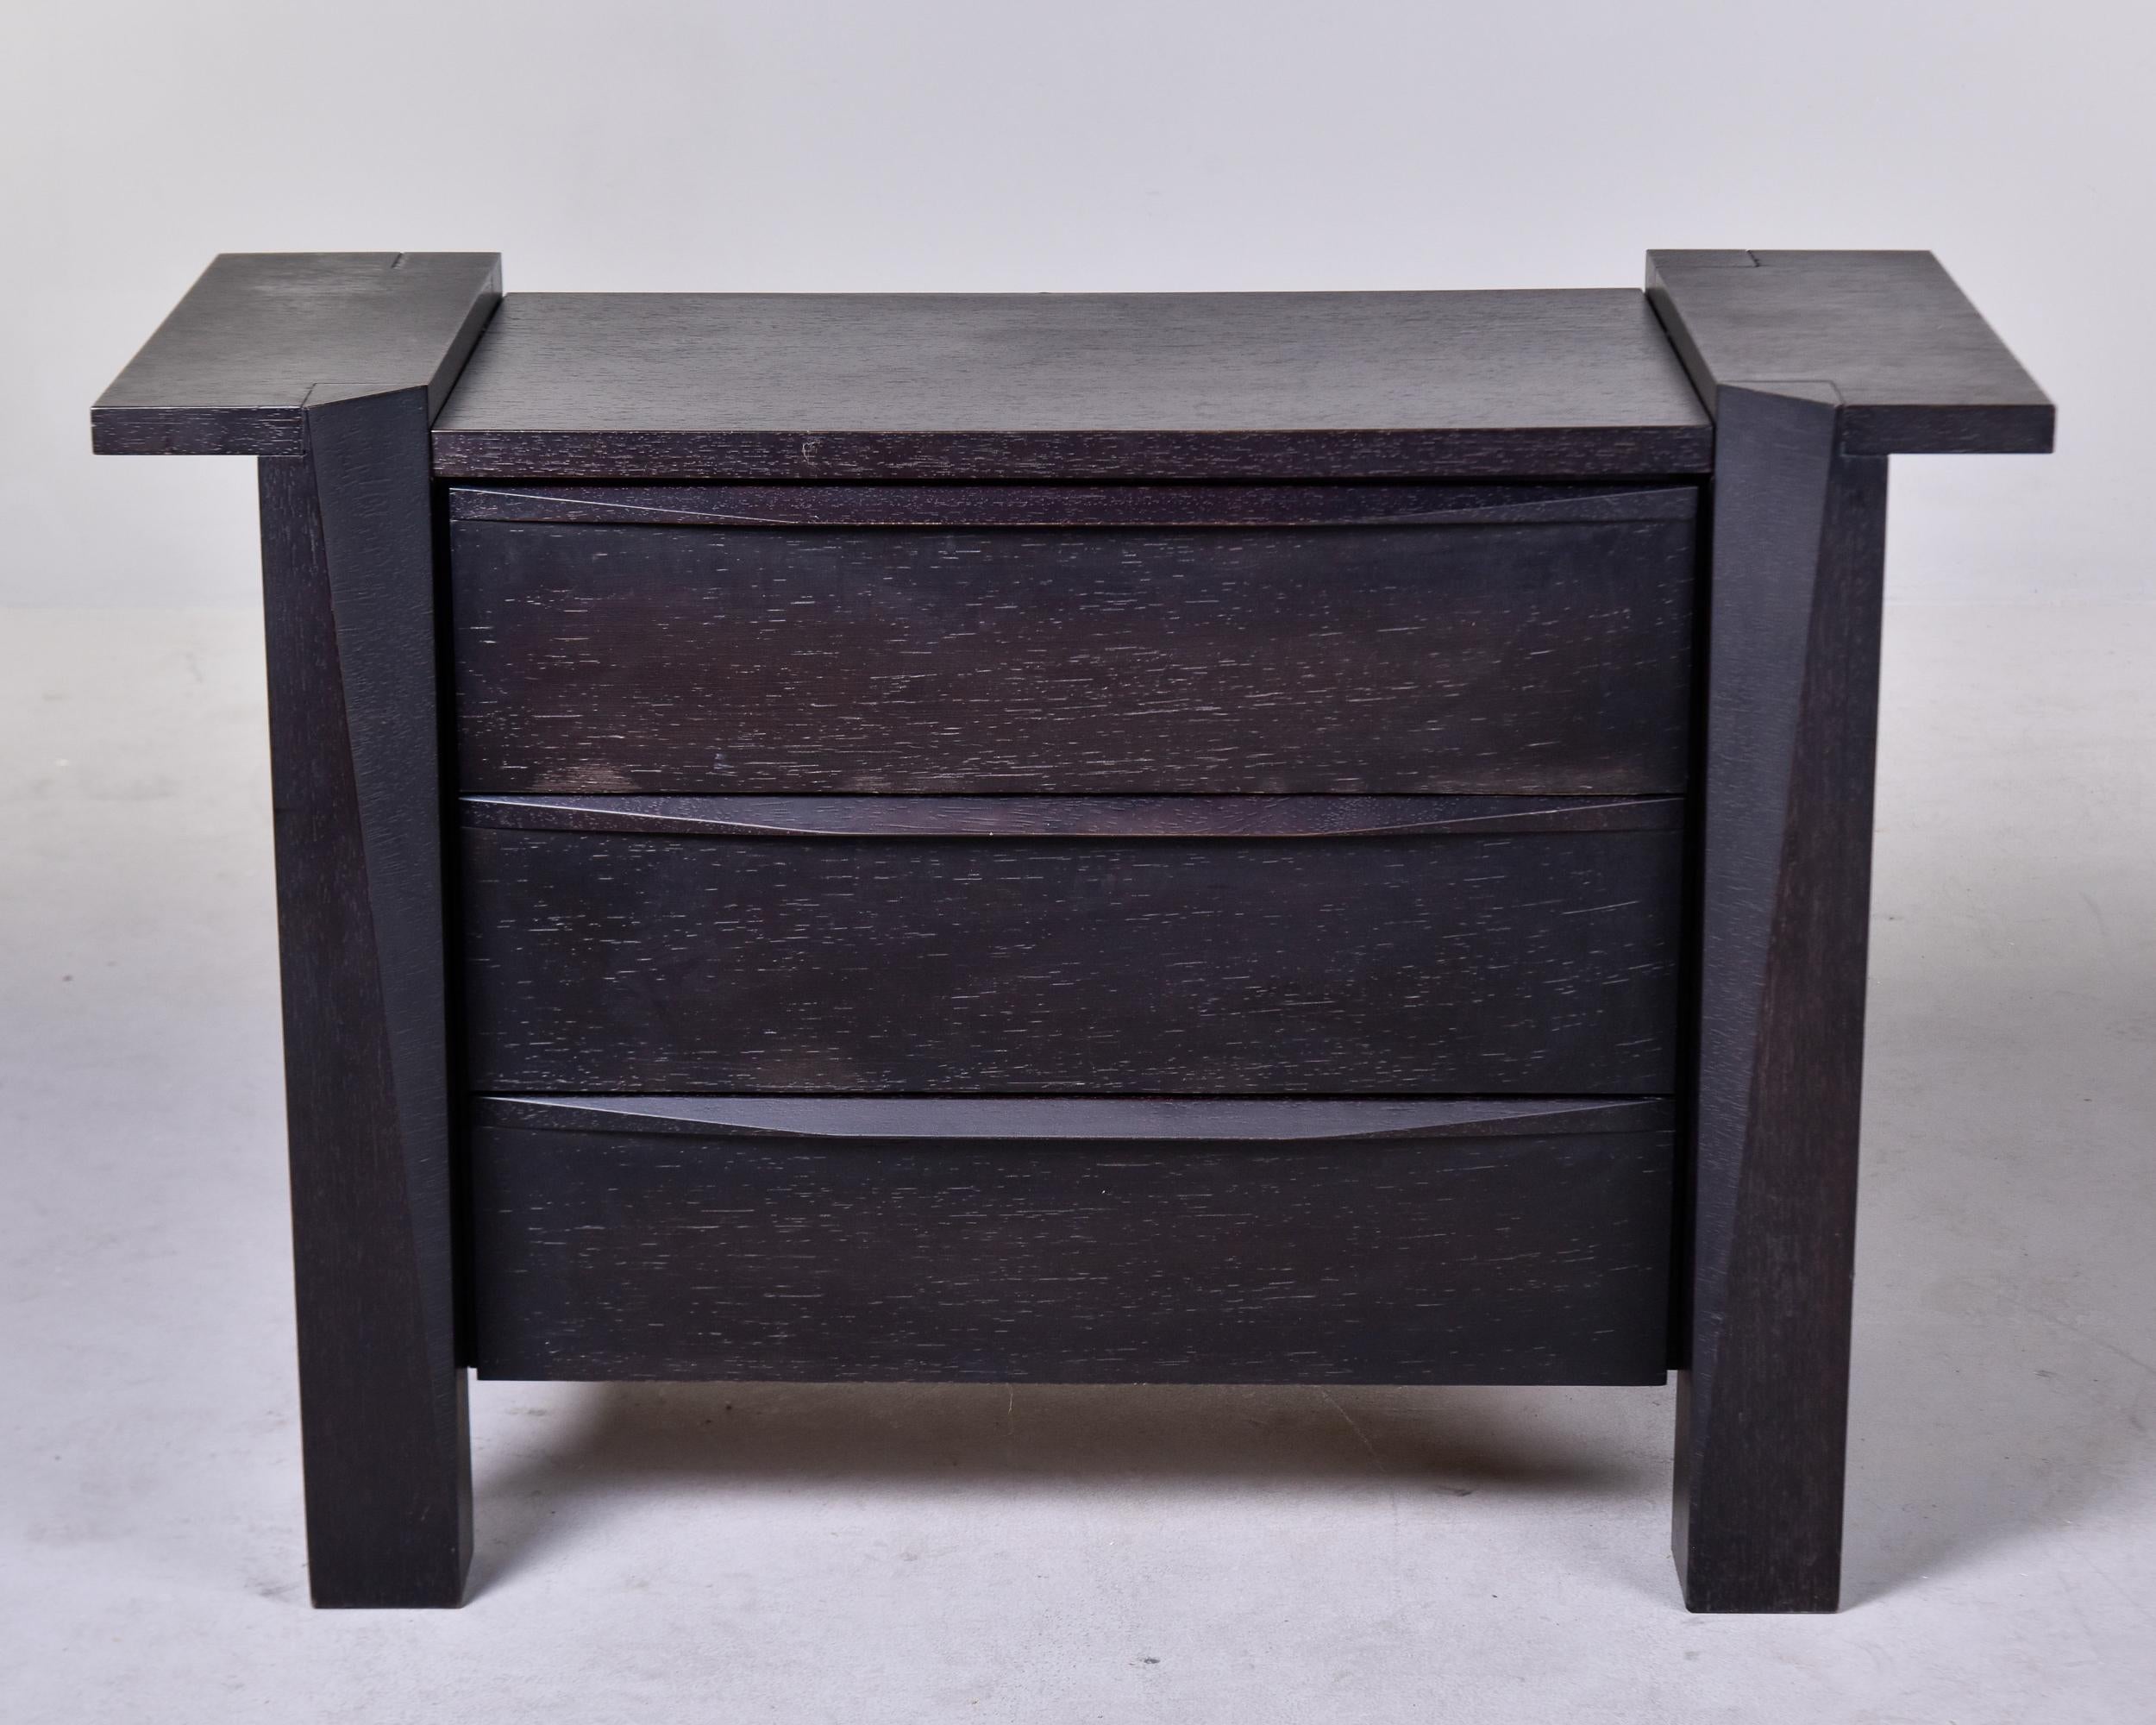 Found in Italy, this circa 1970 chest or commode has three drawers. Made of oak, this piece has a black finish and an unusual, sculptural shape with a flared sides at the top, built in drawer pulls and substantial legs. Unknown maker.